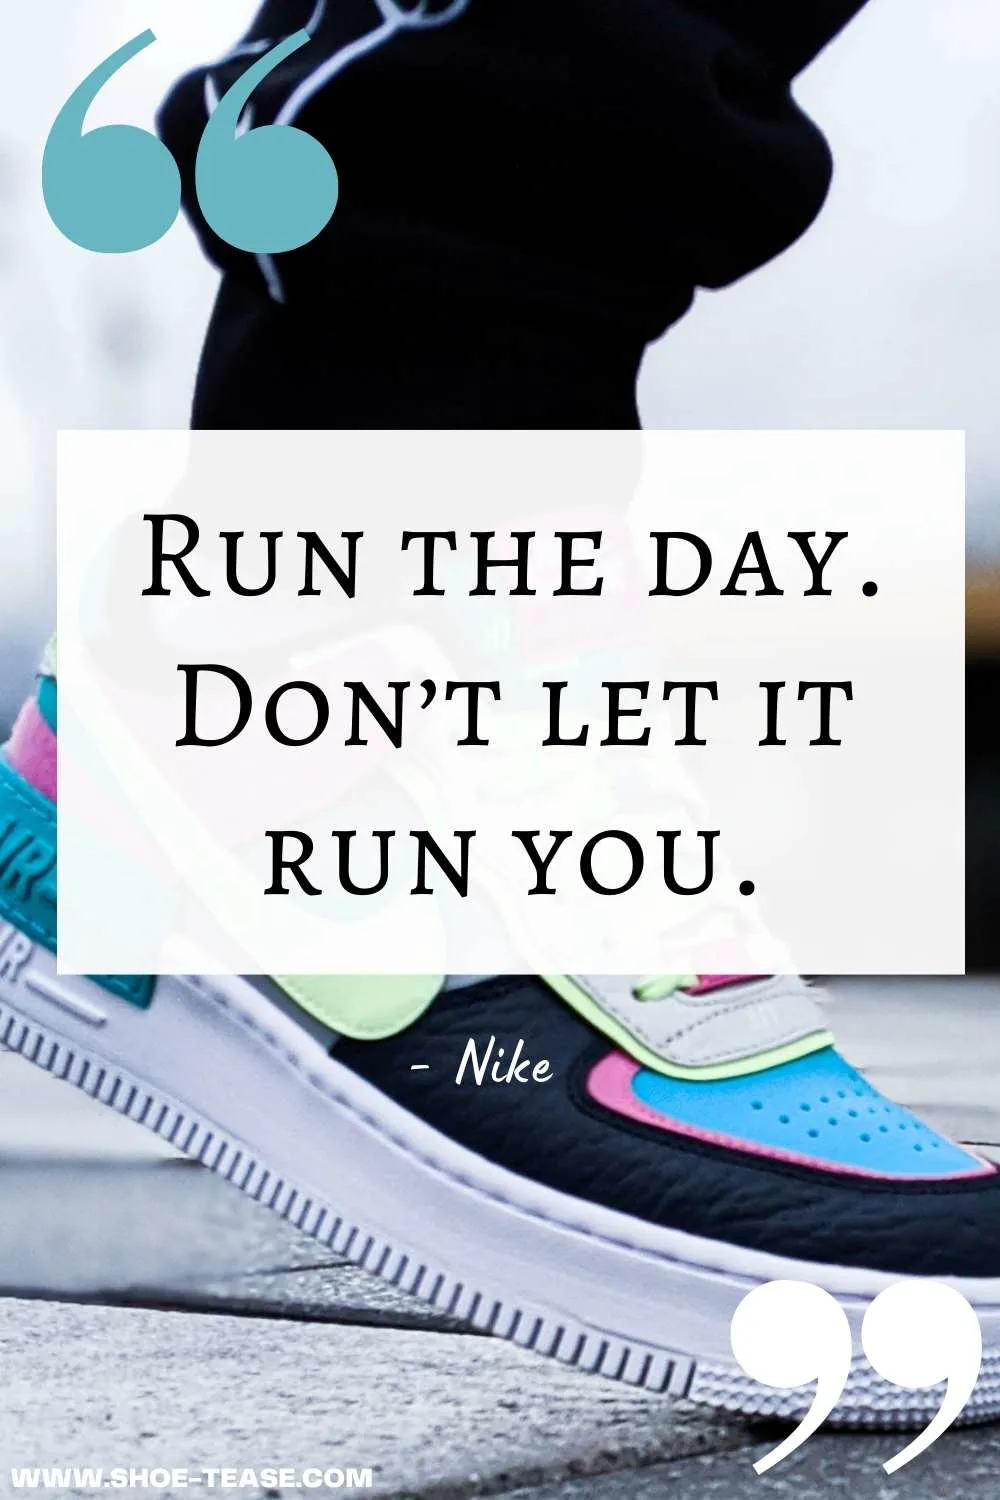 Nike Quote reading Run the day. Don't let it run you over a Nike sneaker with a variety of colors on it.